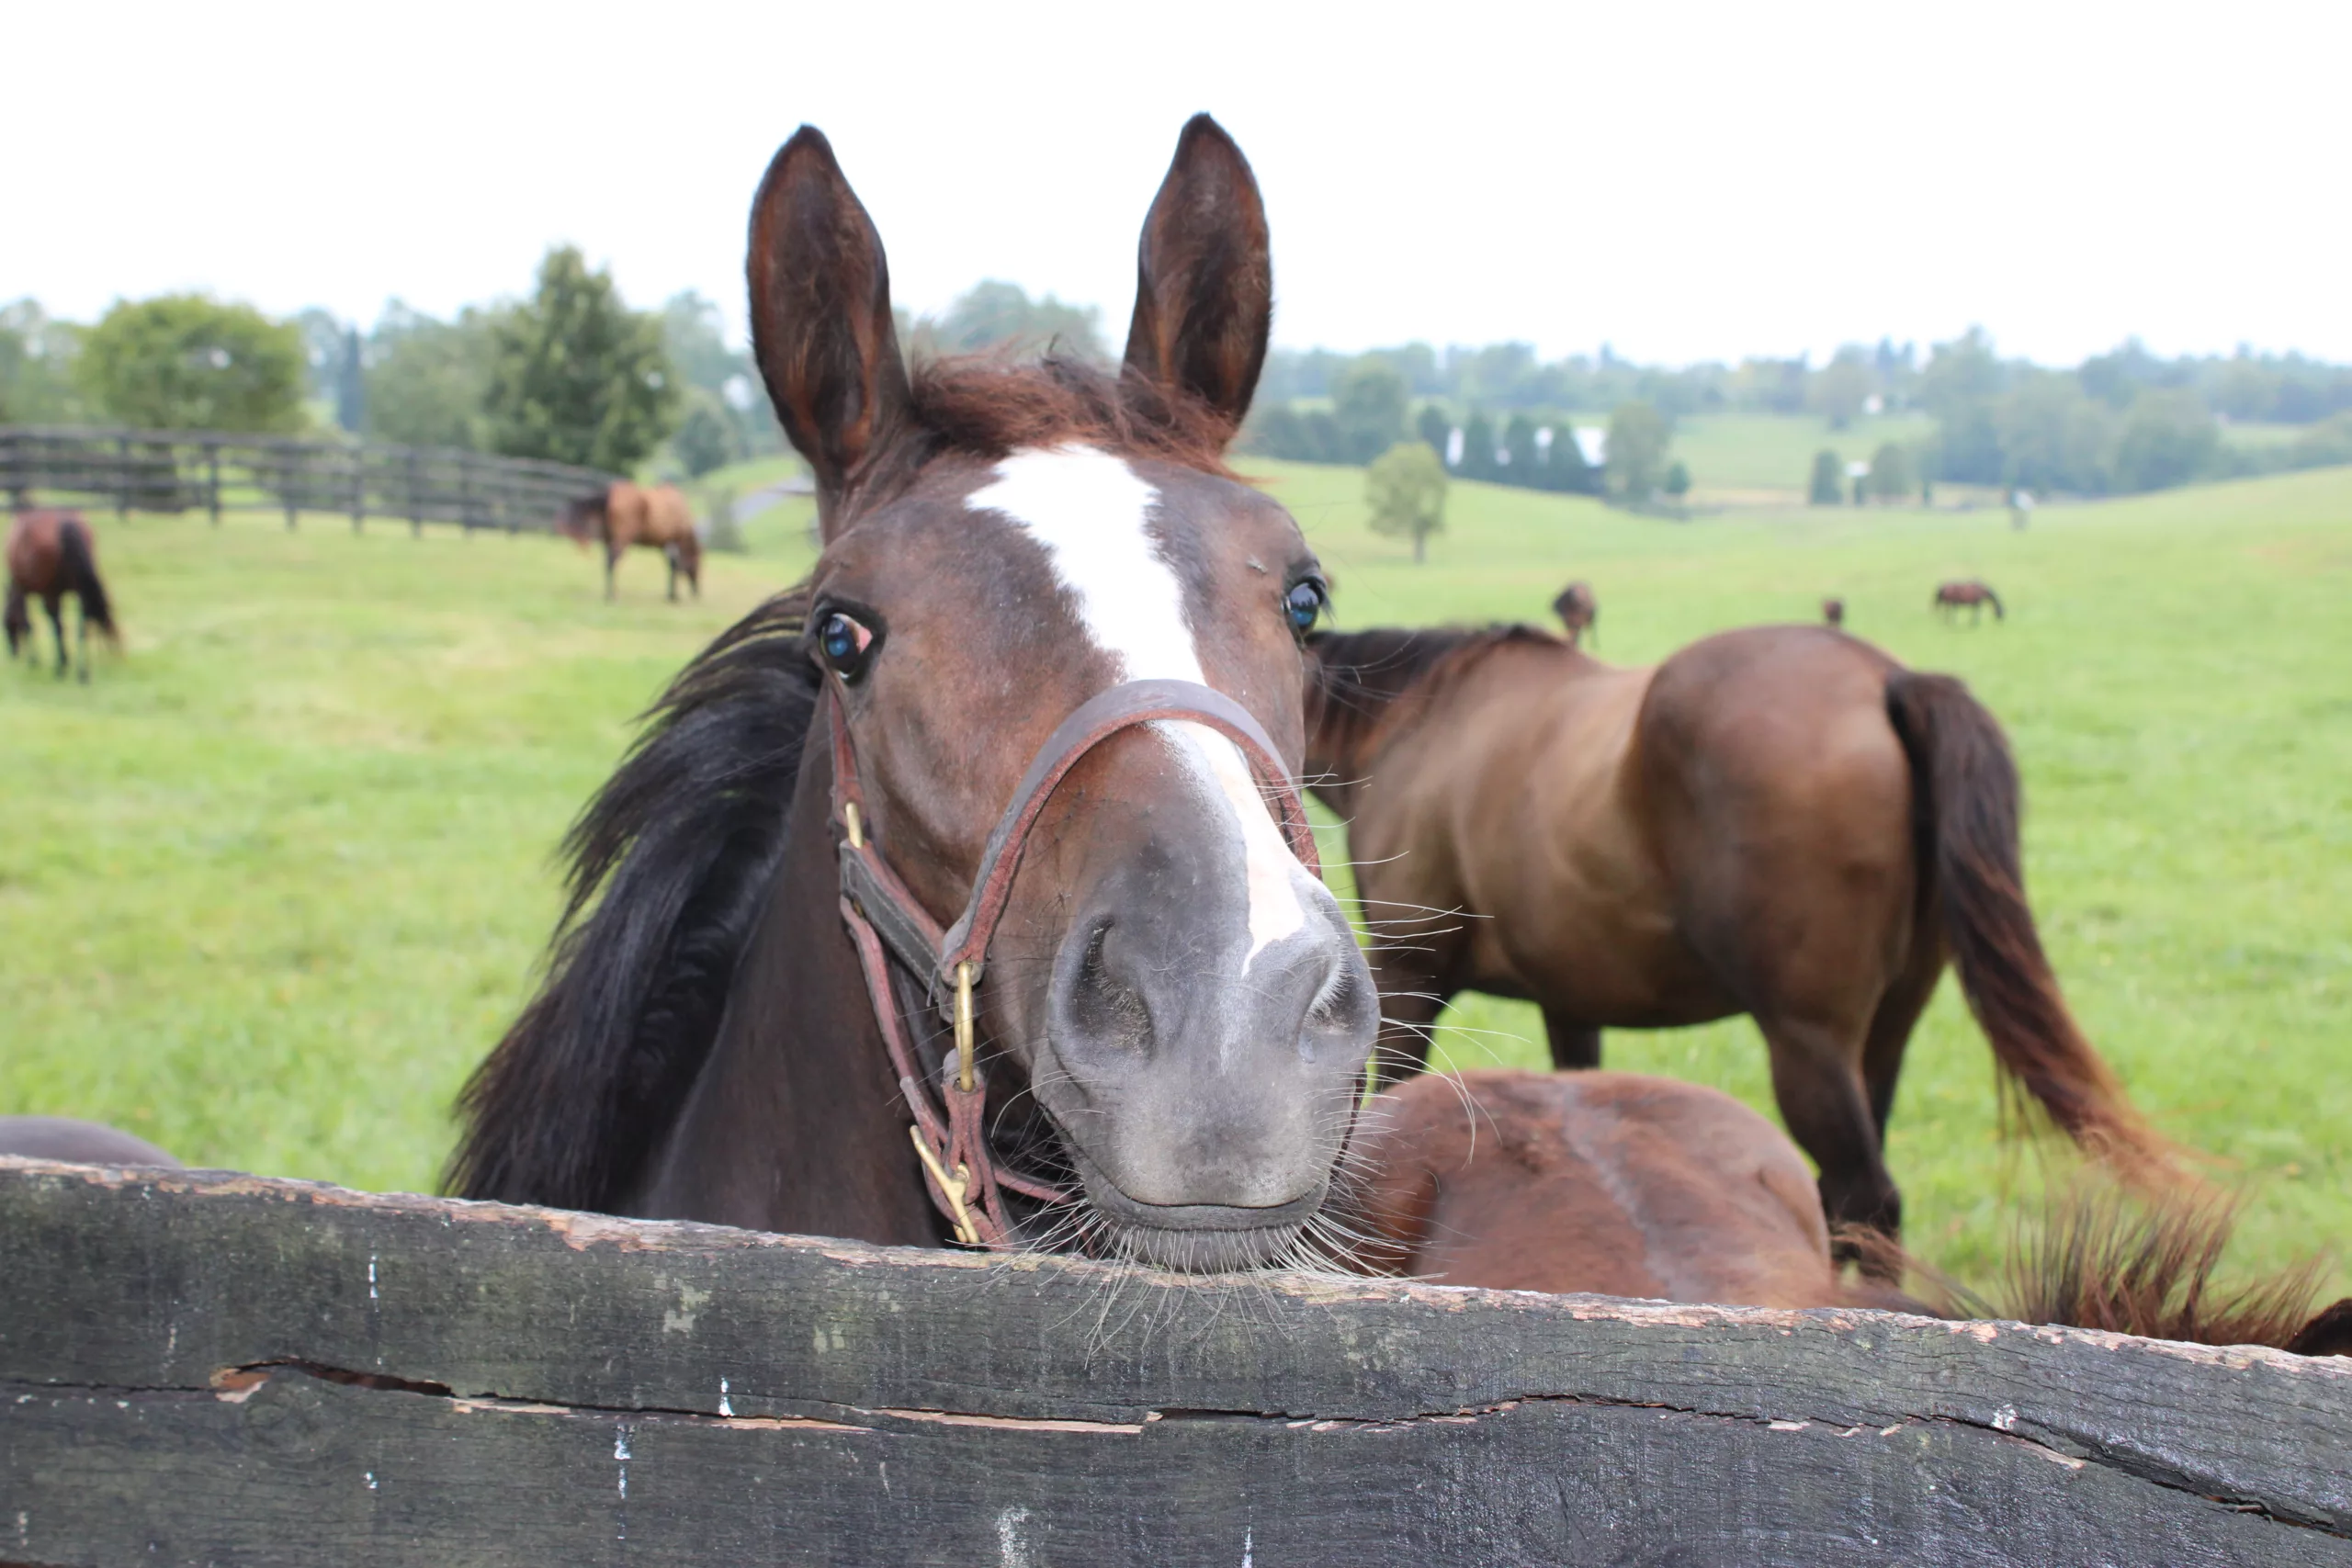 Congressional Animal Protection Caucus applauds steps to combat racehorse deaths